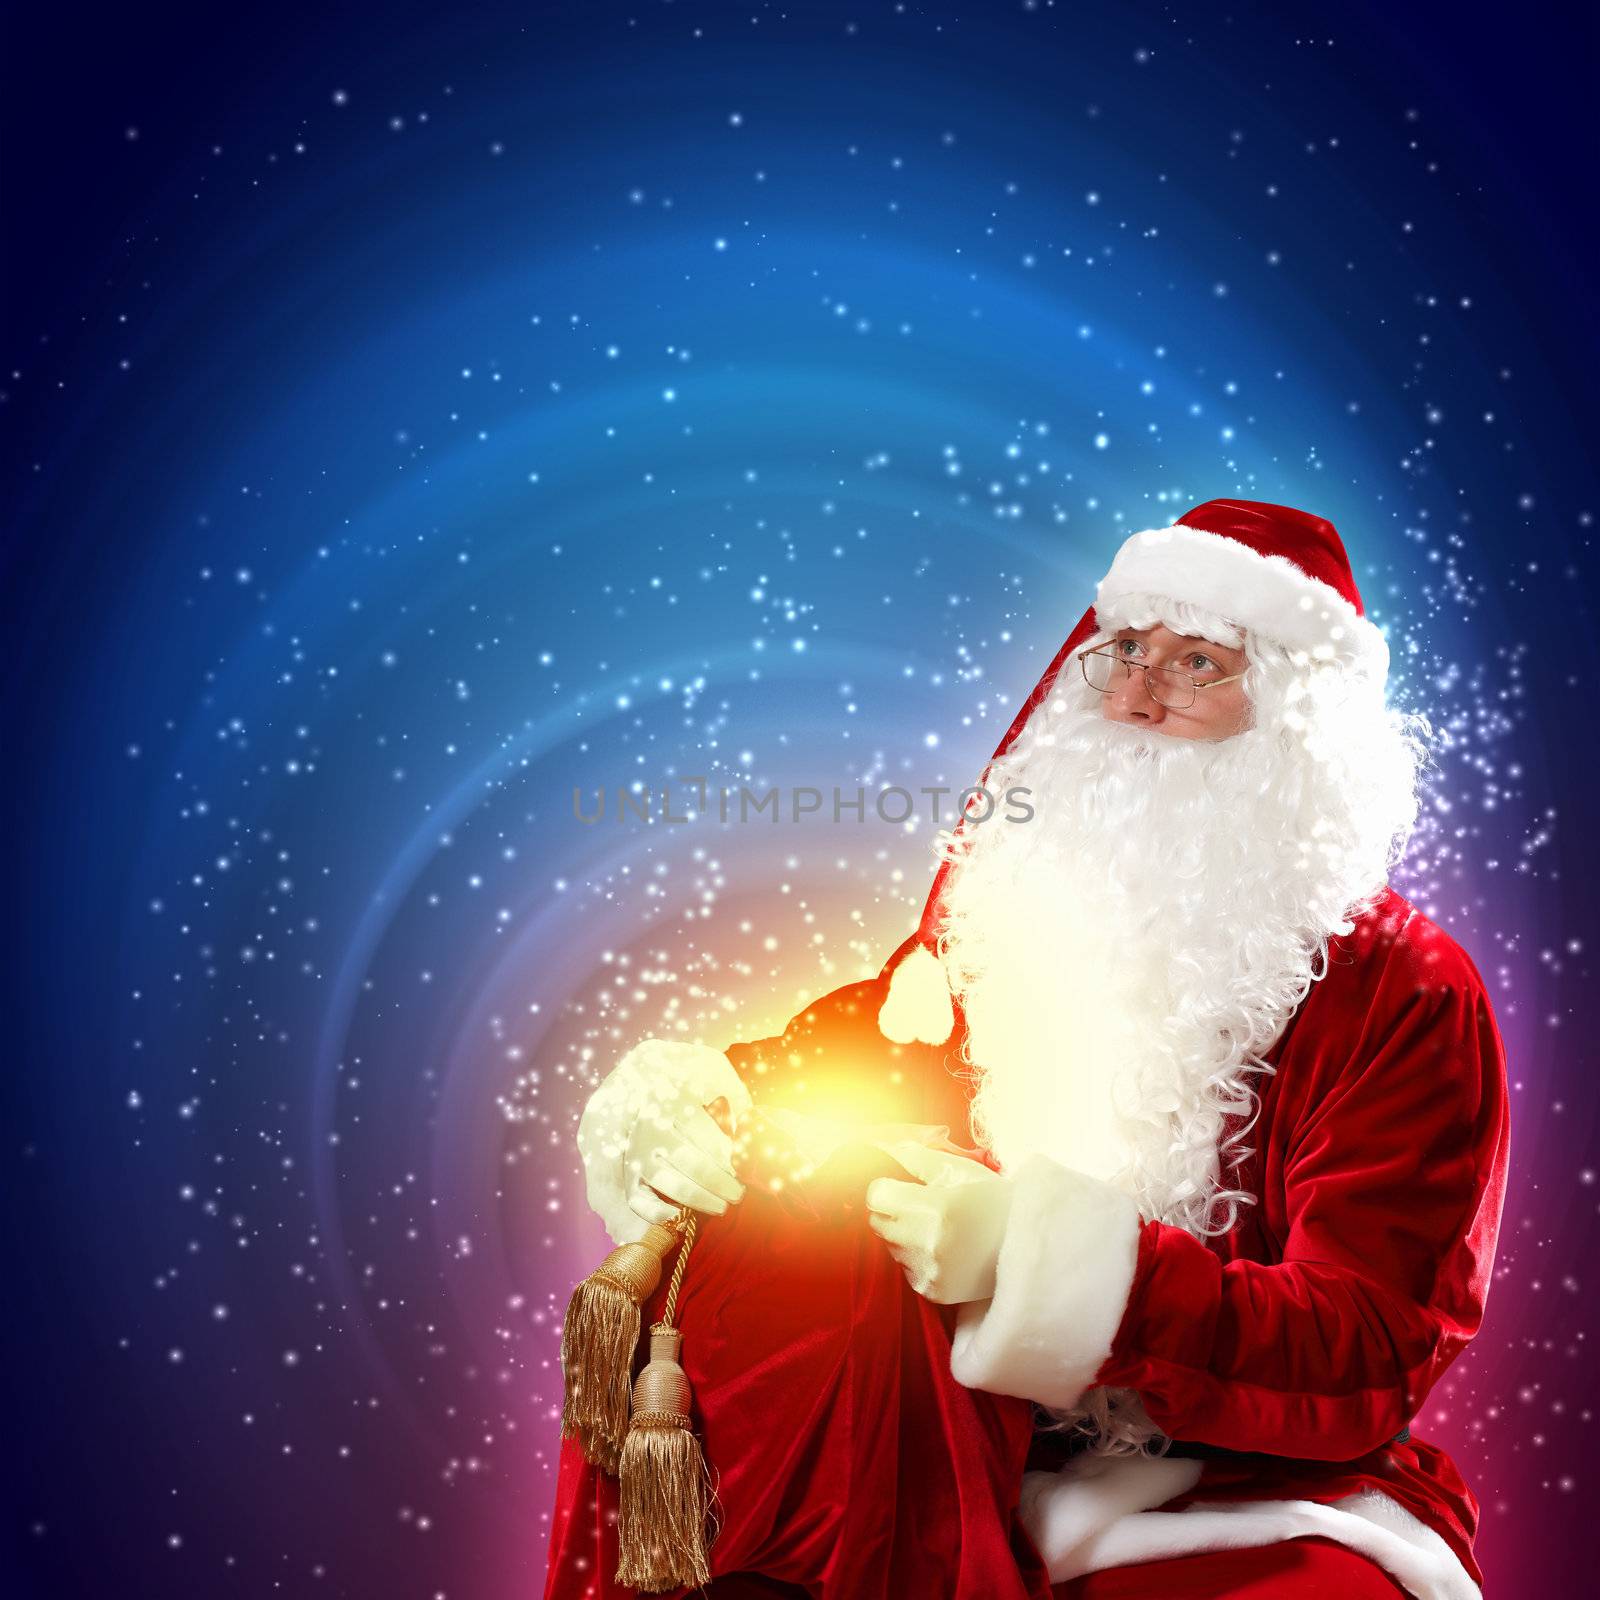 santa with a sack by sergey_nivens